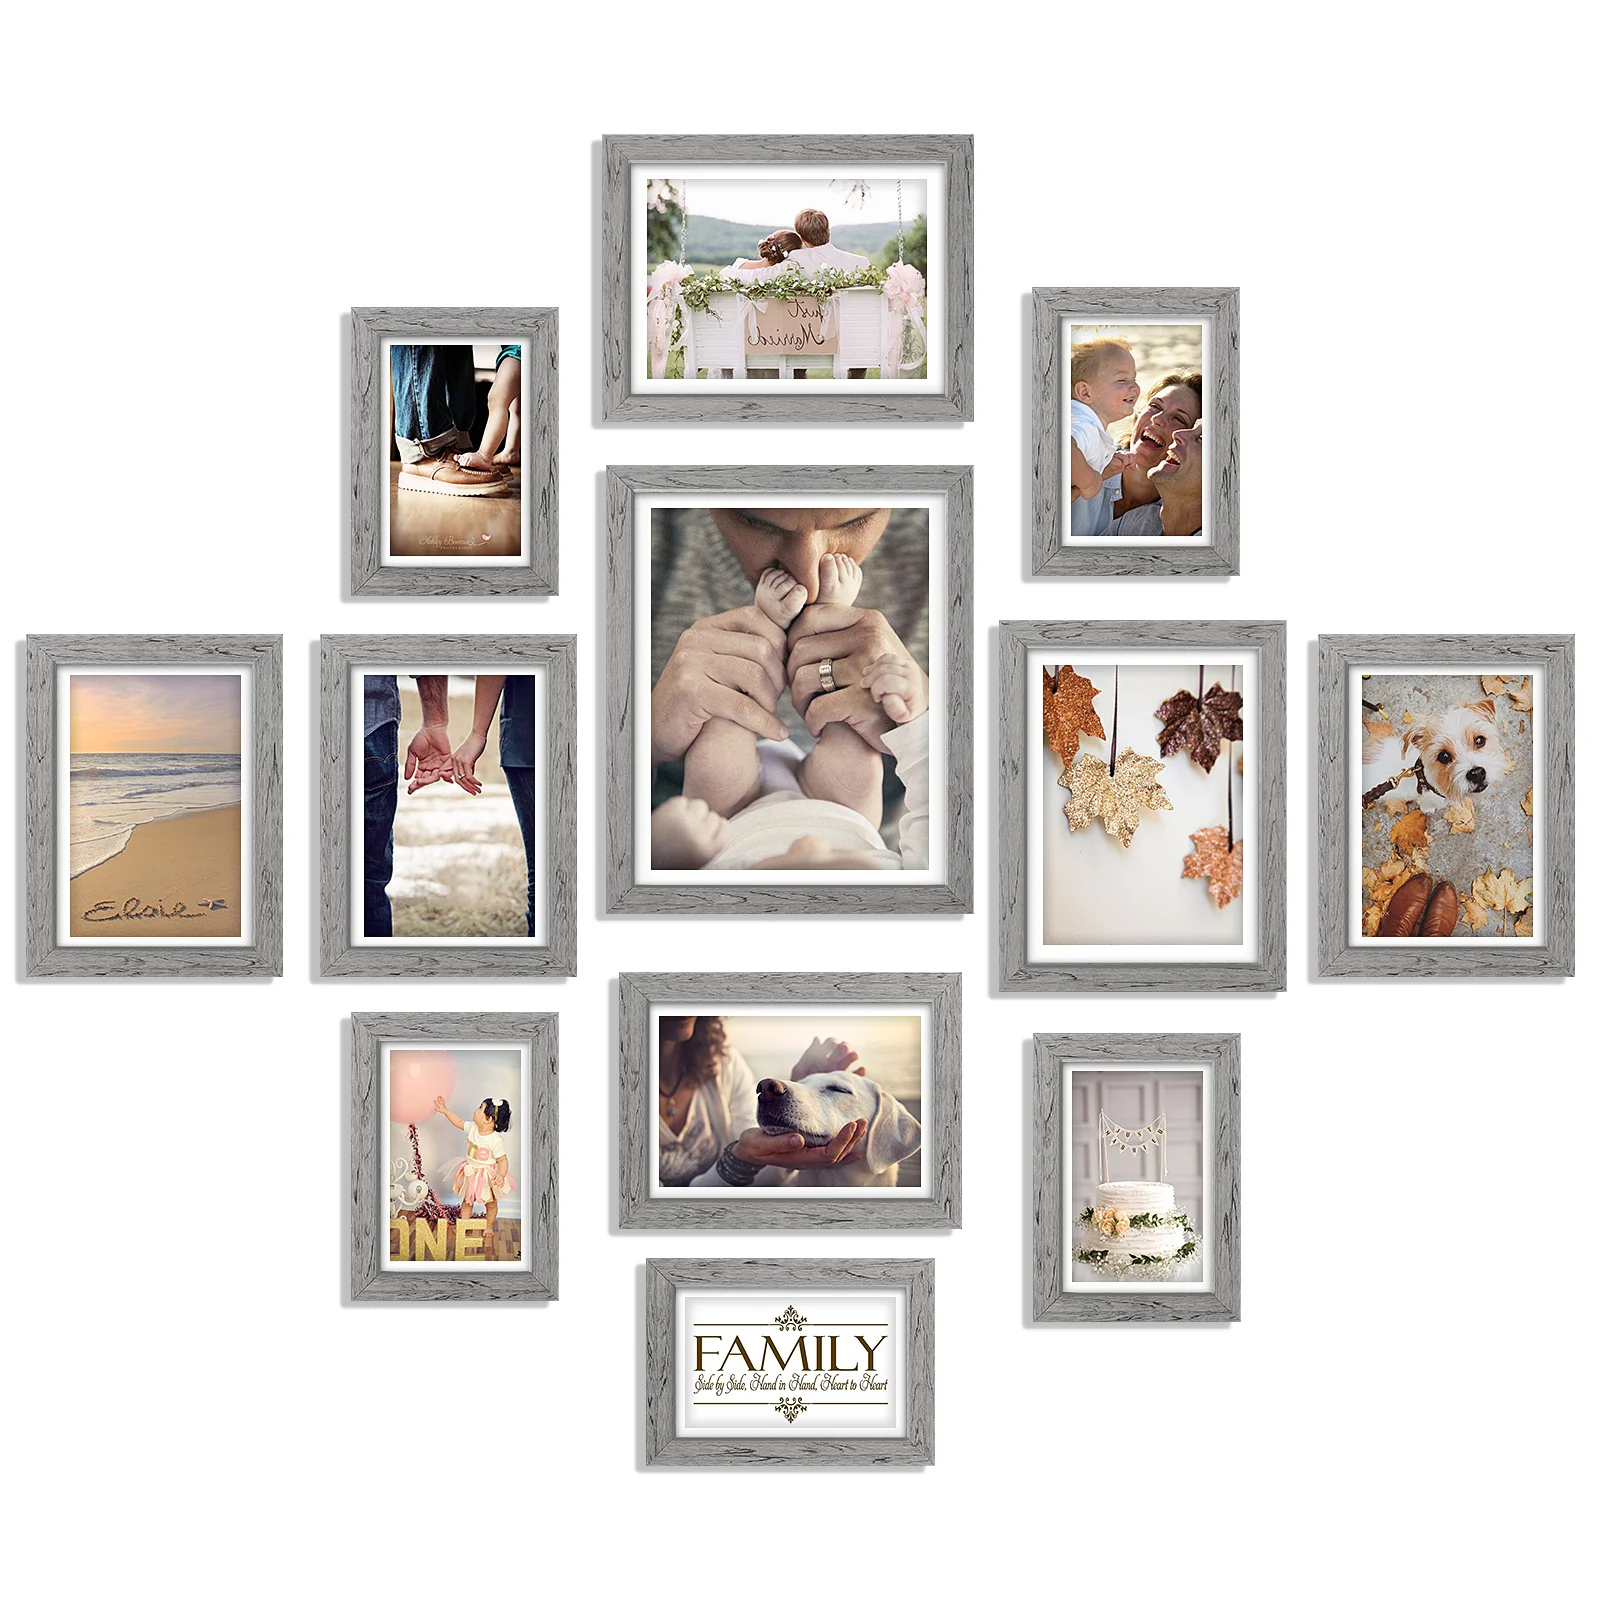 

12pcs Hanging Picture Wall Set Photo Frames Photo Collage Frame Picture Frames for Office Classroom Cafe Home